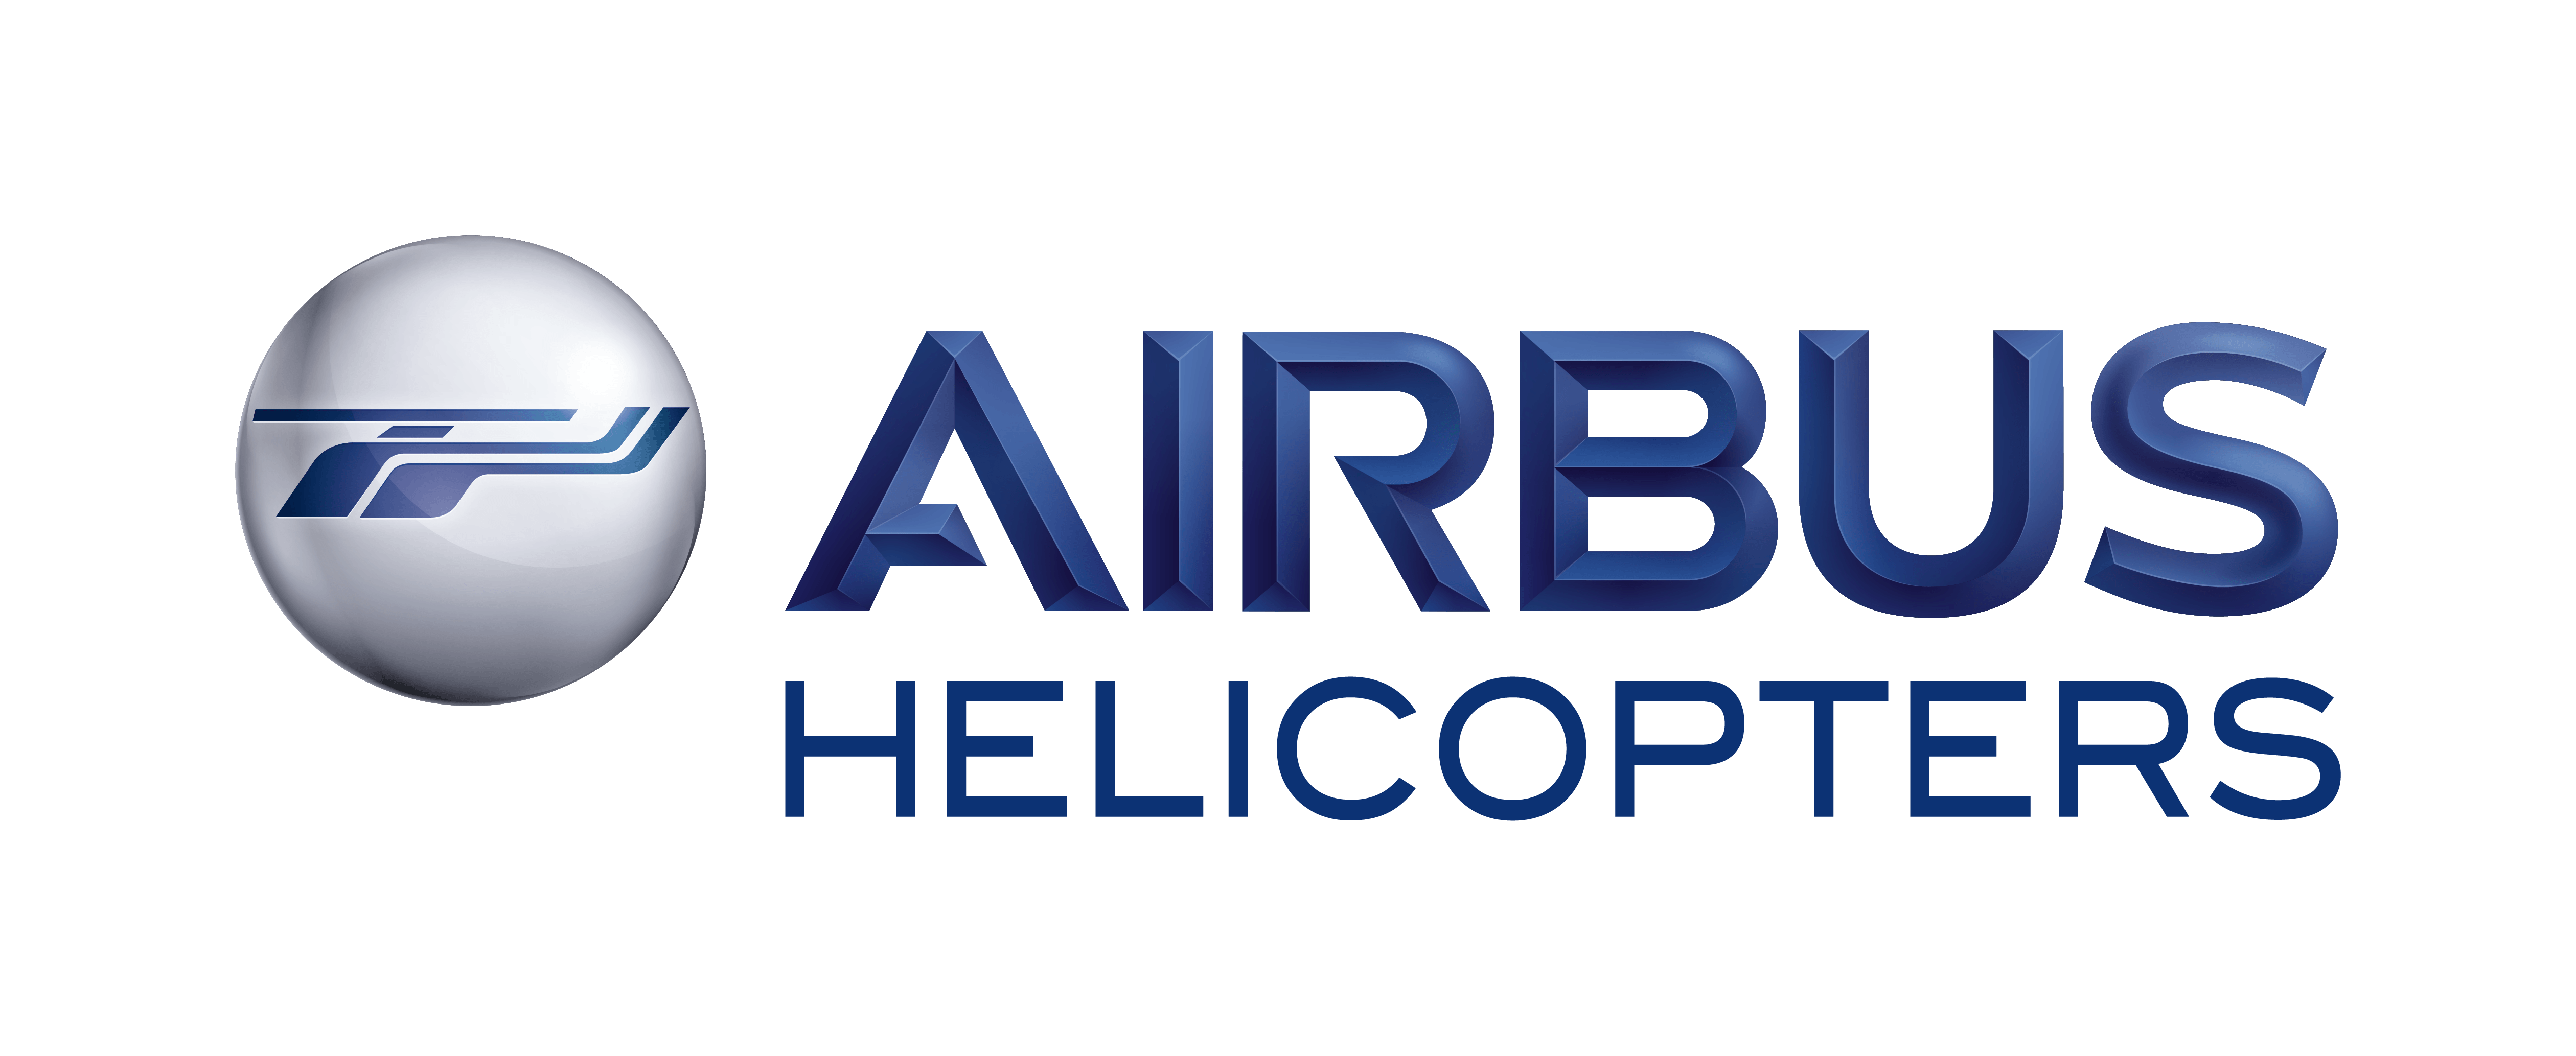 Airbus Logo - Airbus Helicopters Logos